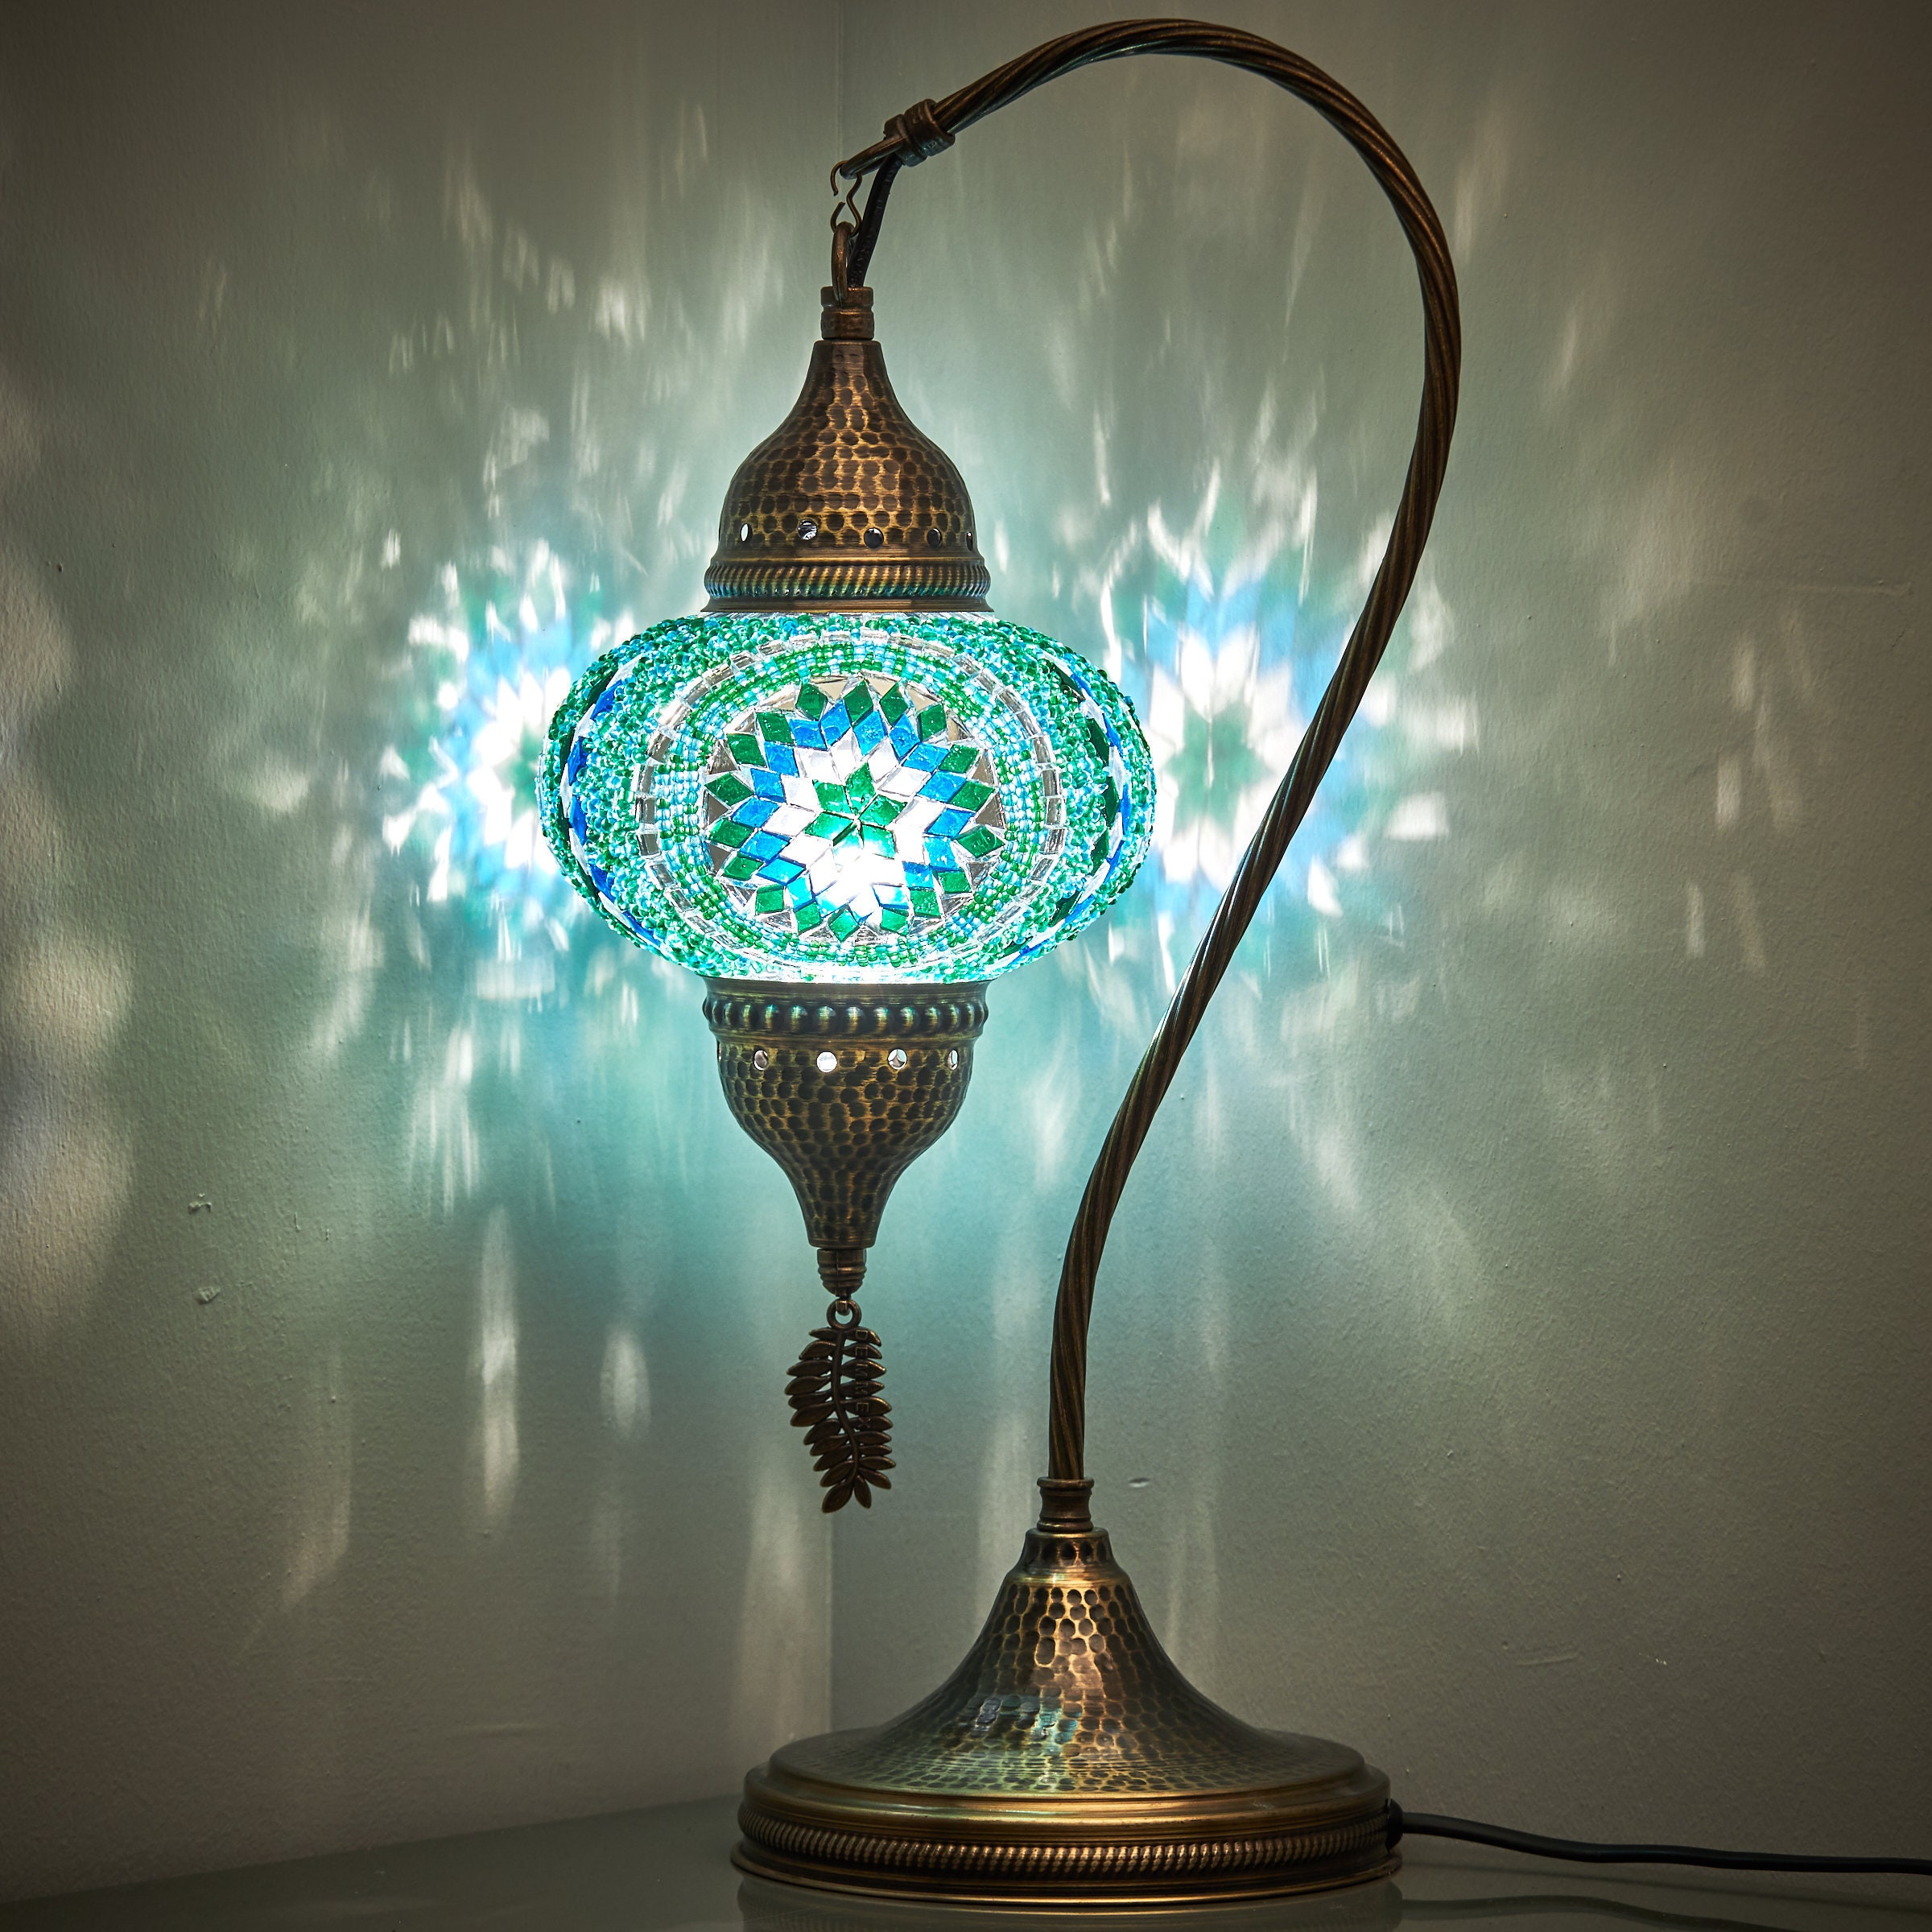 Turkish Moroccan Mosaic Bohemian Colorful Table Lamp BEST PRICE usa seller in VA 